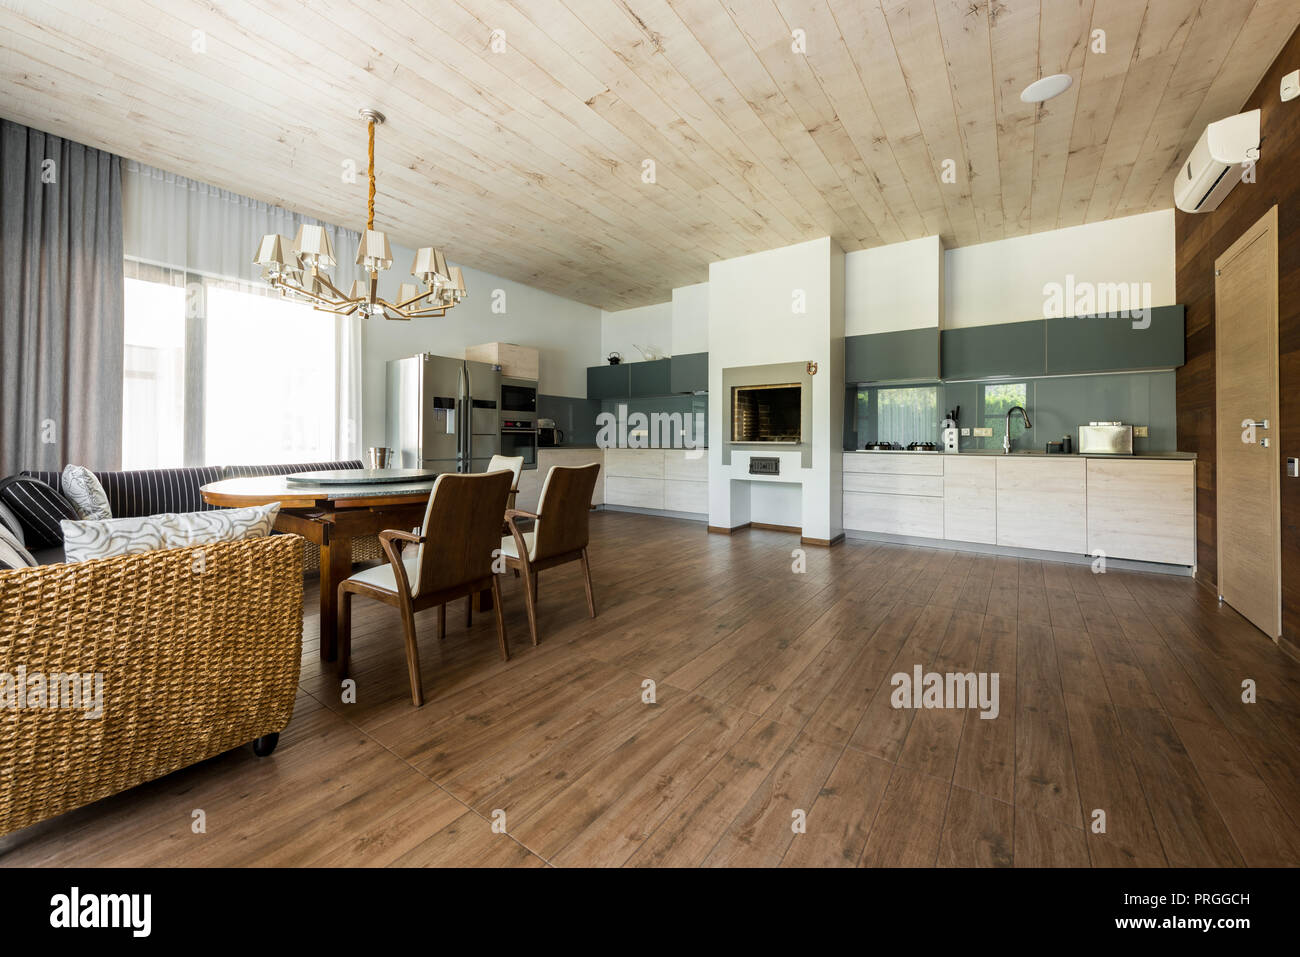 interior view of stylish empty kitchen and dining room Stock Photo